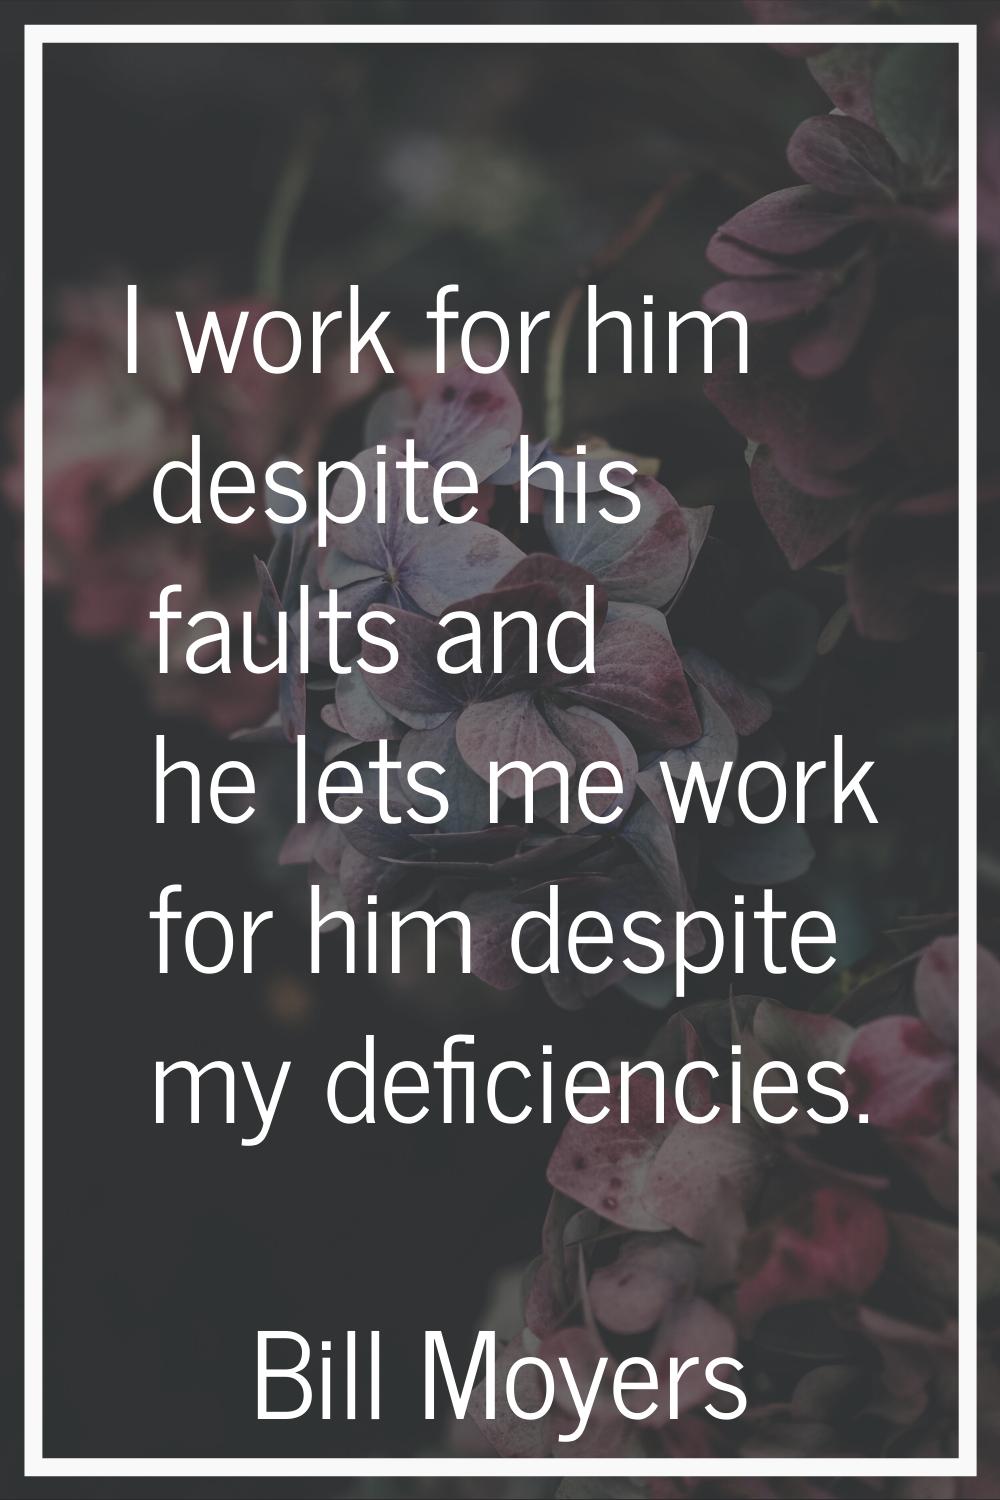 I work for him despite his faults and he lets me work for him despite my deficiencies.